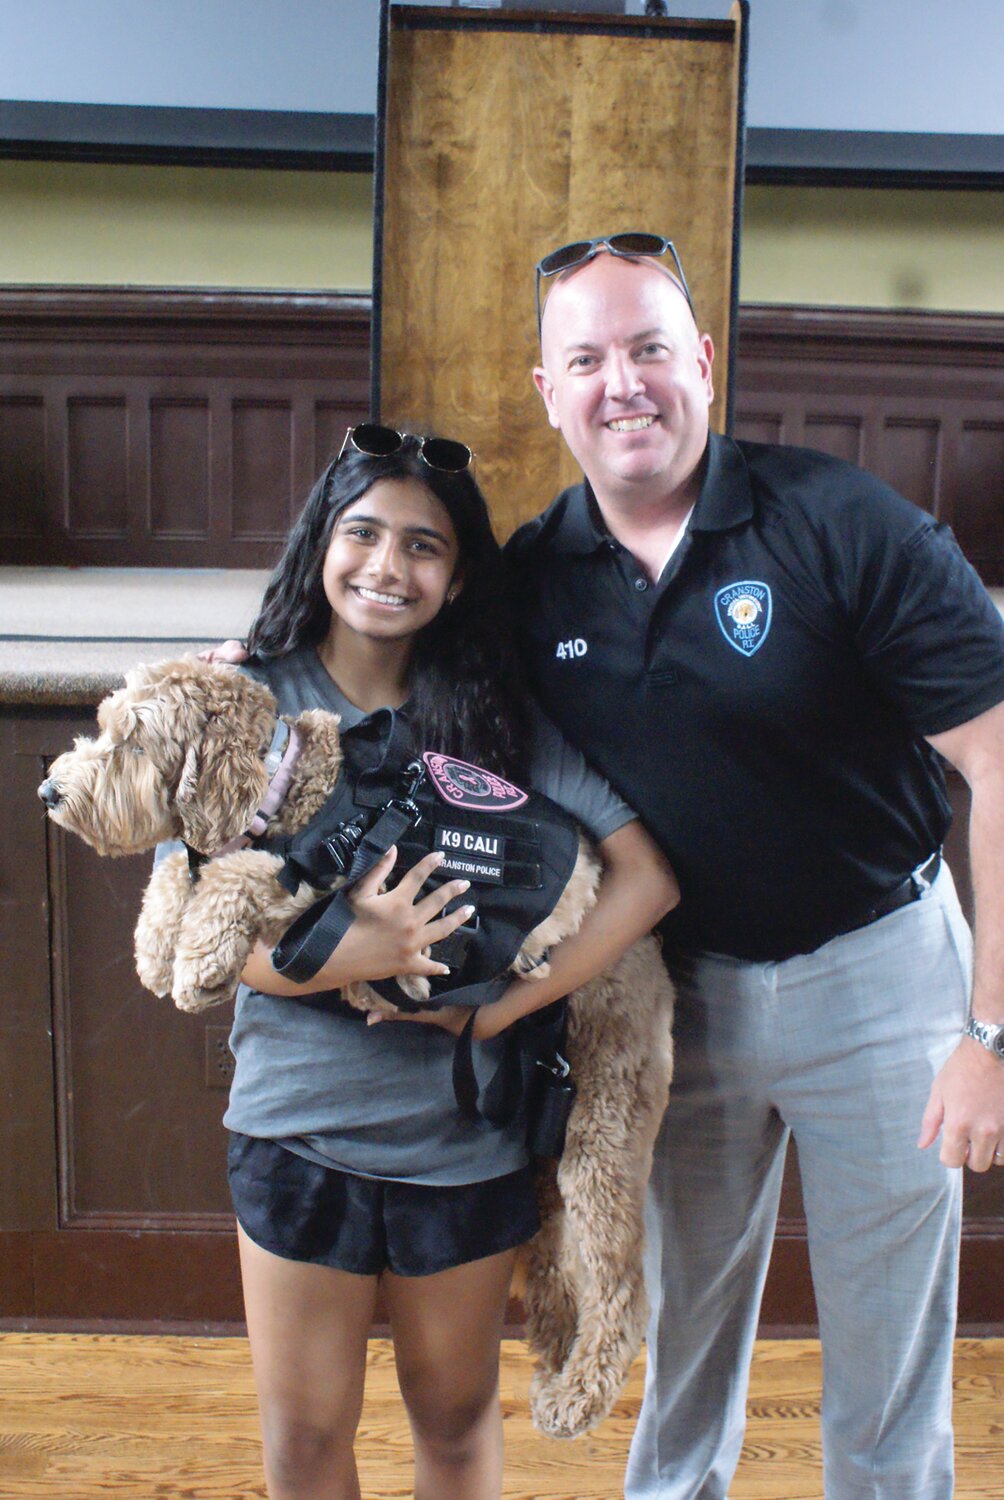 THERAPY AND A SNUGGLE: Shreya Ganguli gets a chance to meet and hold Cali as Detective Iacone smiles with pride at how well Cali has been trained.